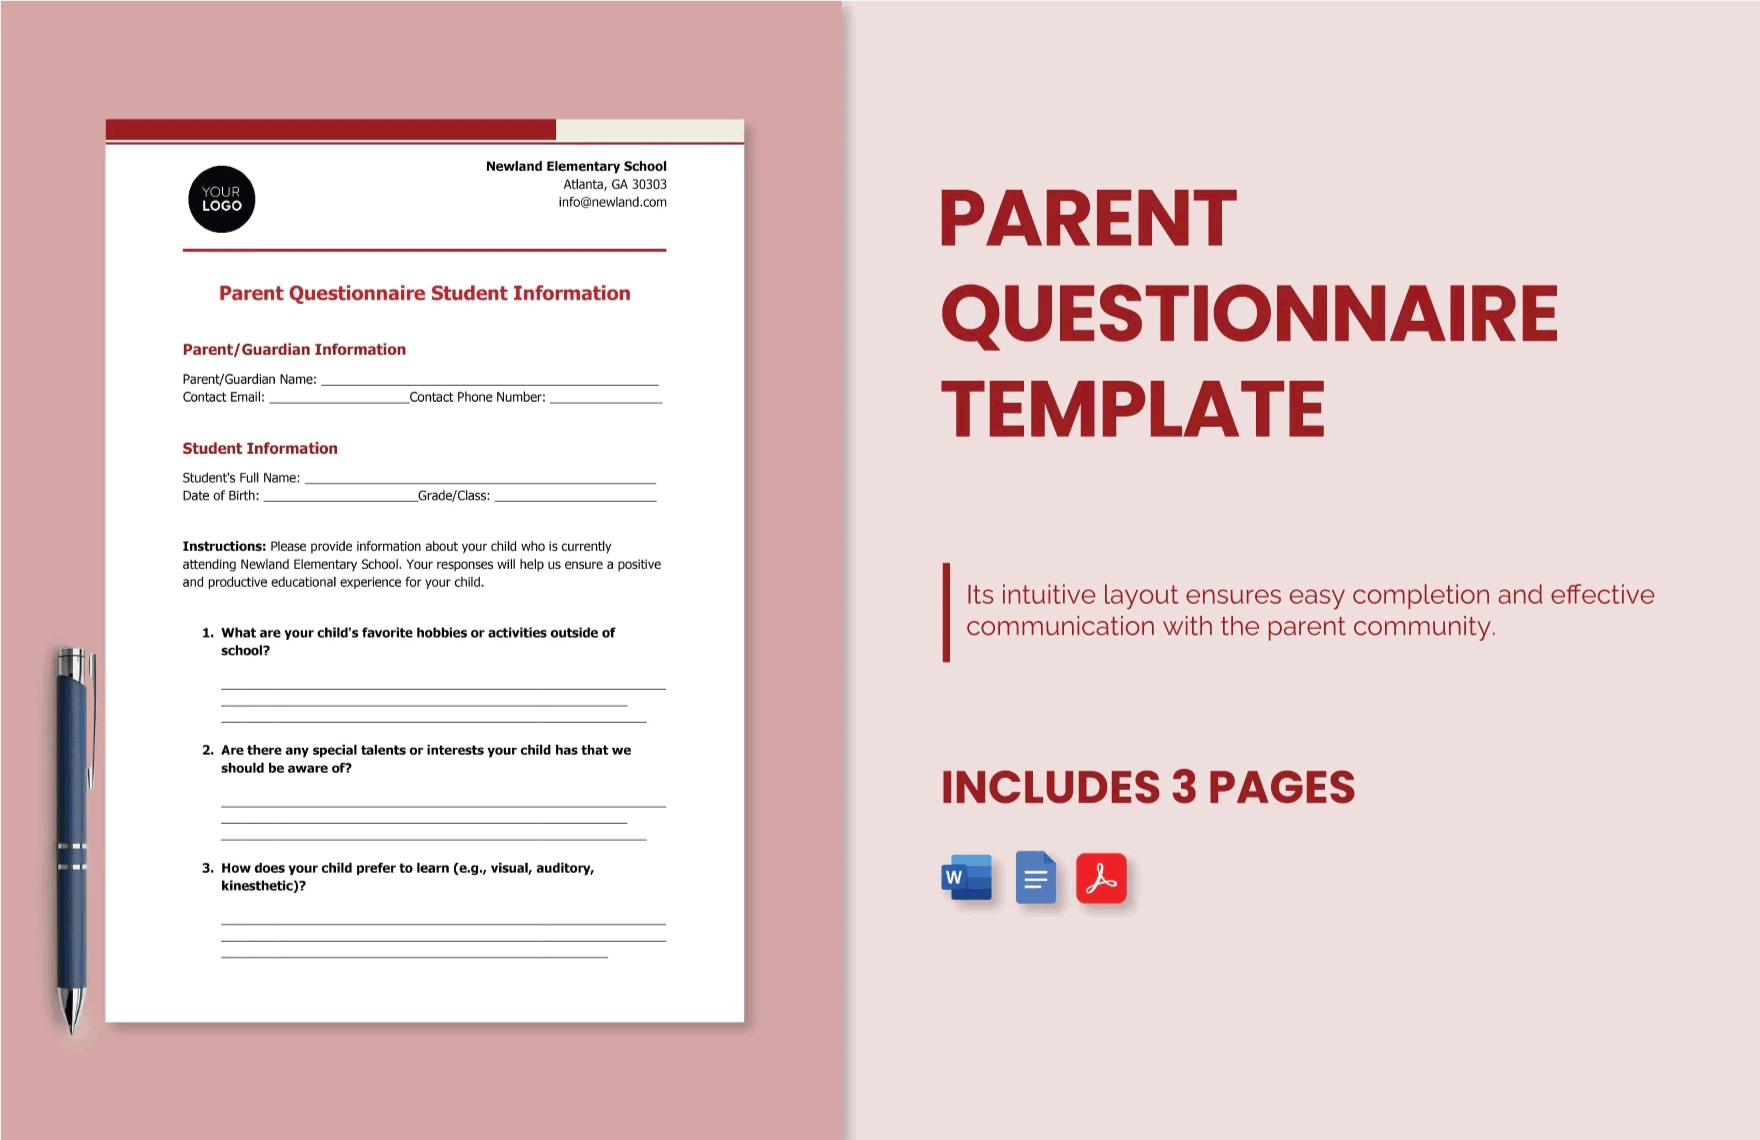 Free Parent Questionnaire Template in Word, Google Docs, PDF